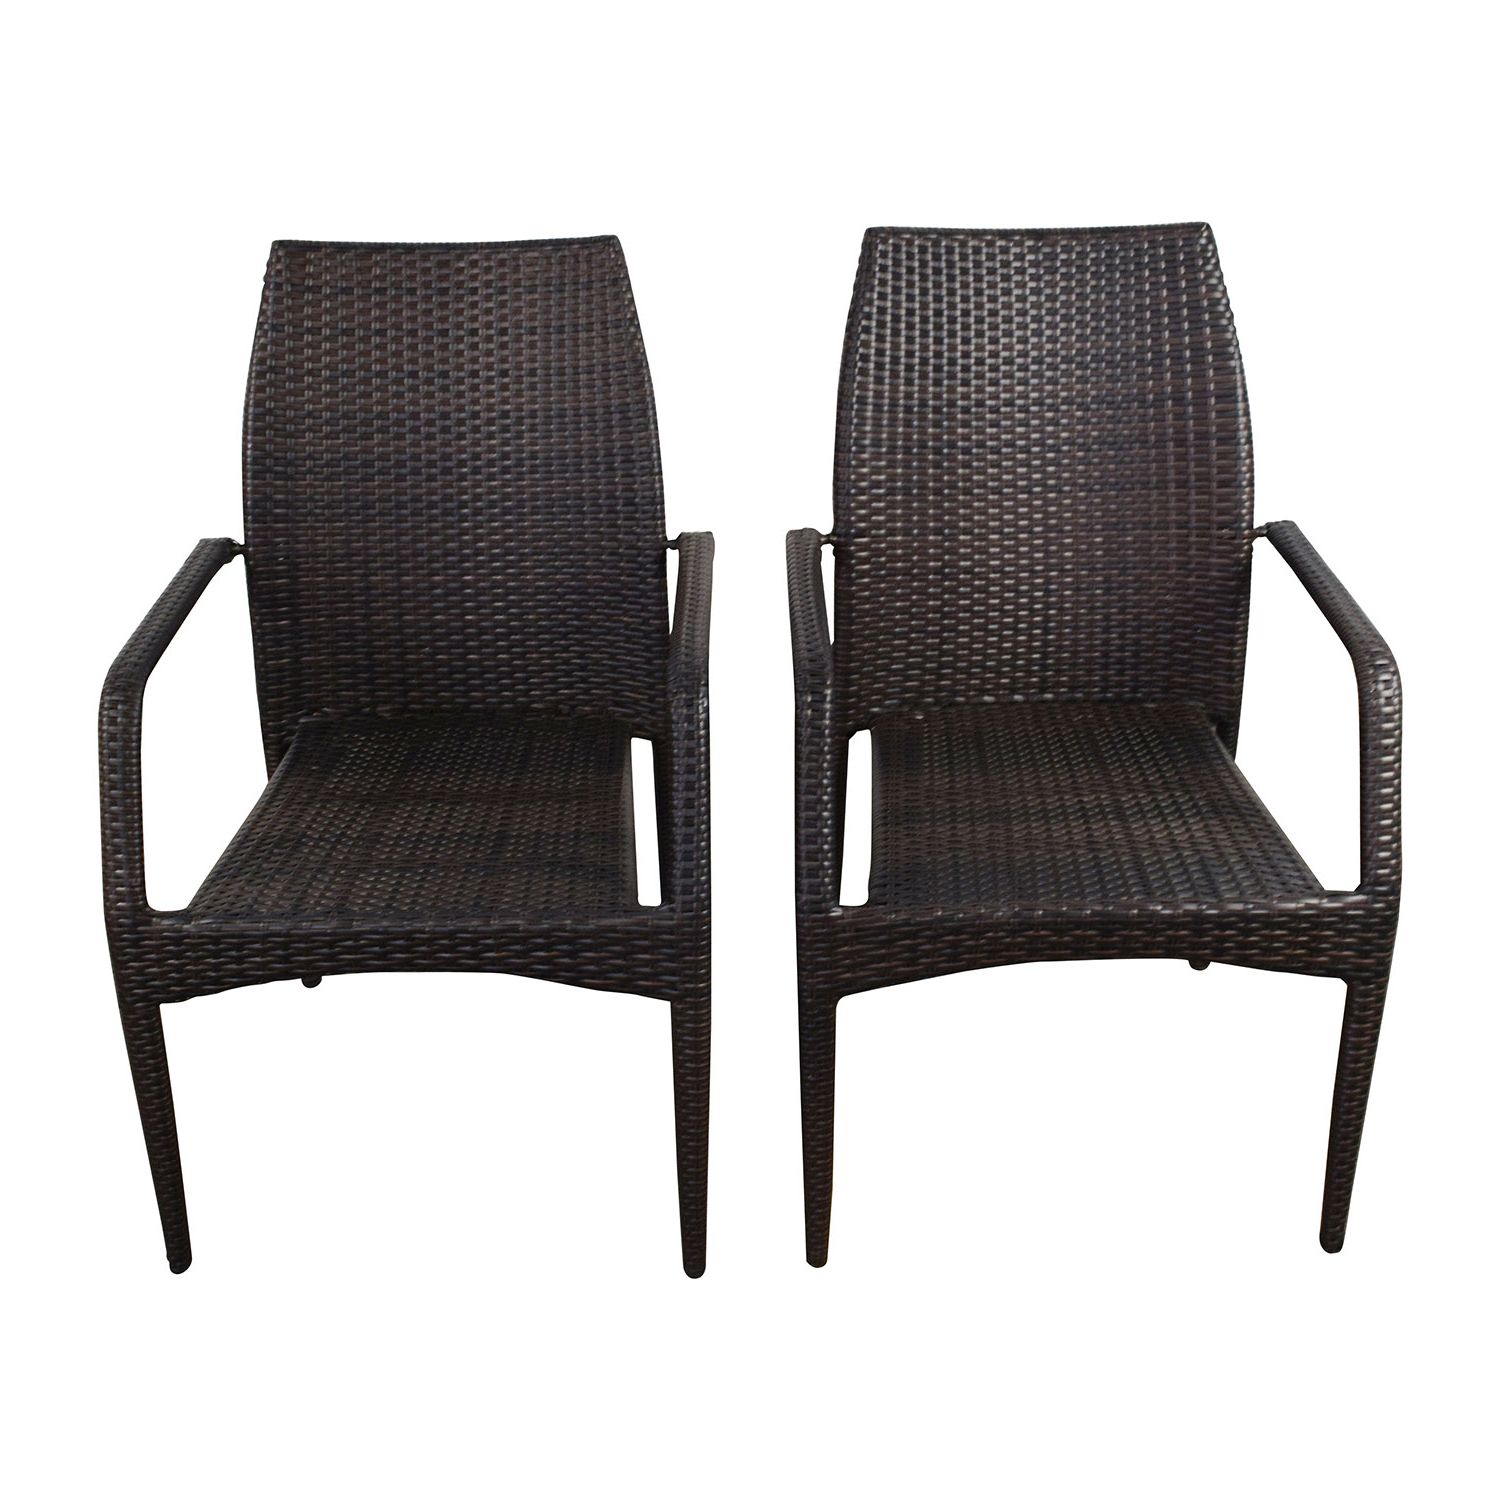 [%85% Off – Dark Brown Wicker Outdoor Dining Chairs / Chairs Within Recent Dark Wood Outdoor Reclining Chairs|dark Wood Outdoor Reclining Chairs For Widely Used 85% Off – Dark Brown Wicker Outdoor Dining Chairs / Chairs|favorite Dark Wood Outdoor Reclining Chairs With 85% Off – Dark Brown Wicker Outdoor Dining Chairs / Chairs|latest 85% Off – Dark Brown Wicker Outdoor Dining Chairs / Chairs In Dark Wood Outdoor Reclining Chairs%] (View 5 of 15)